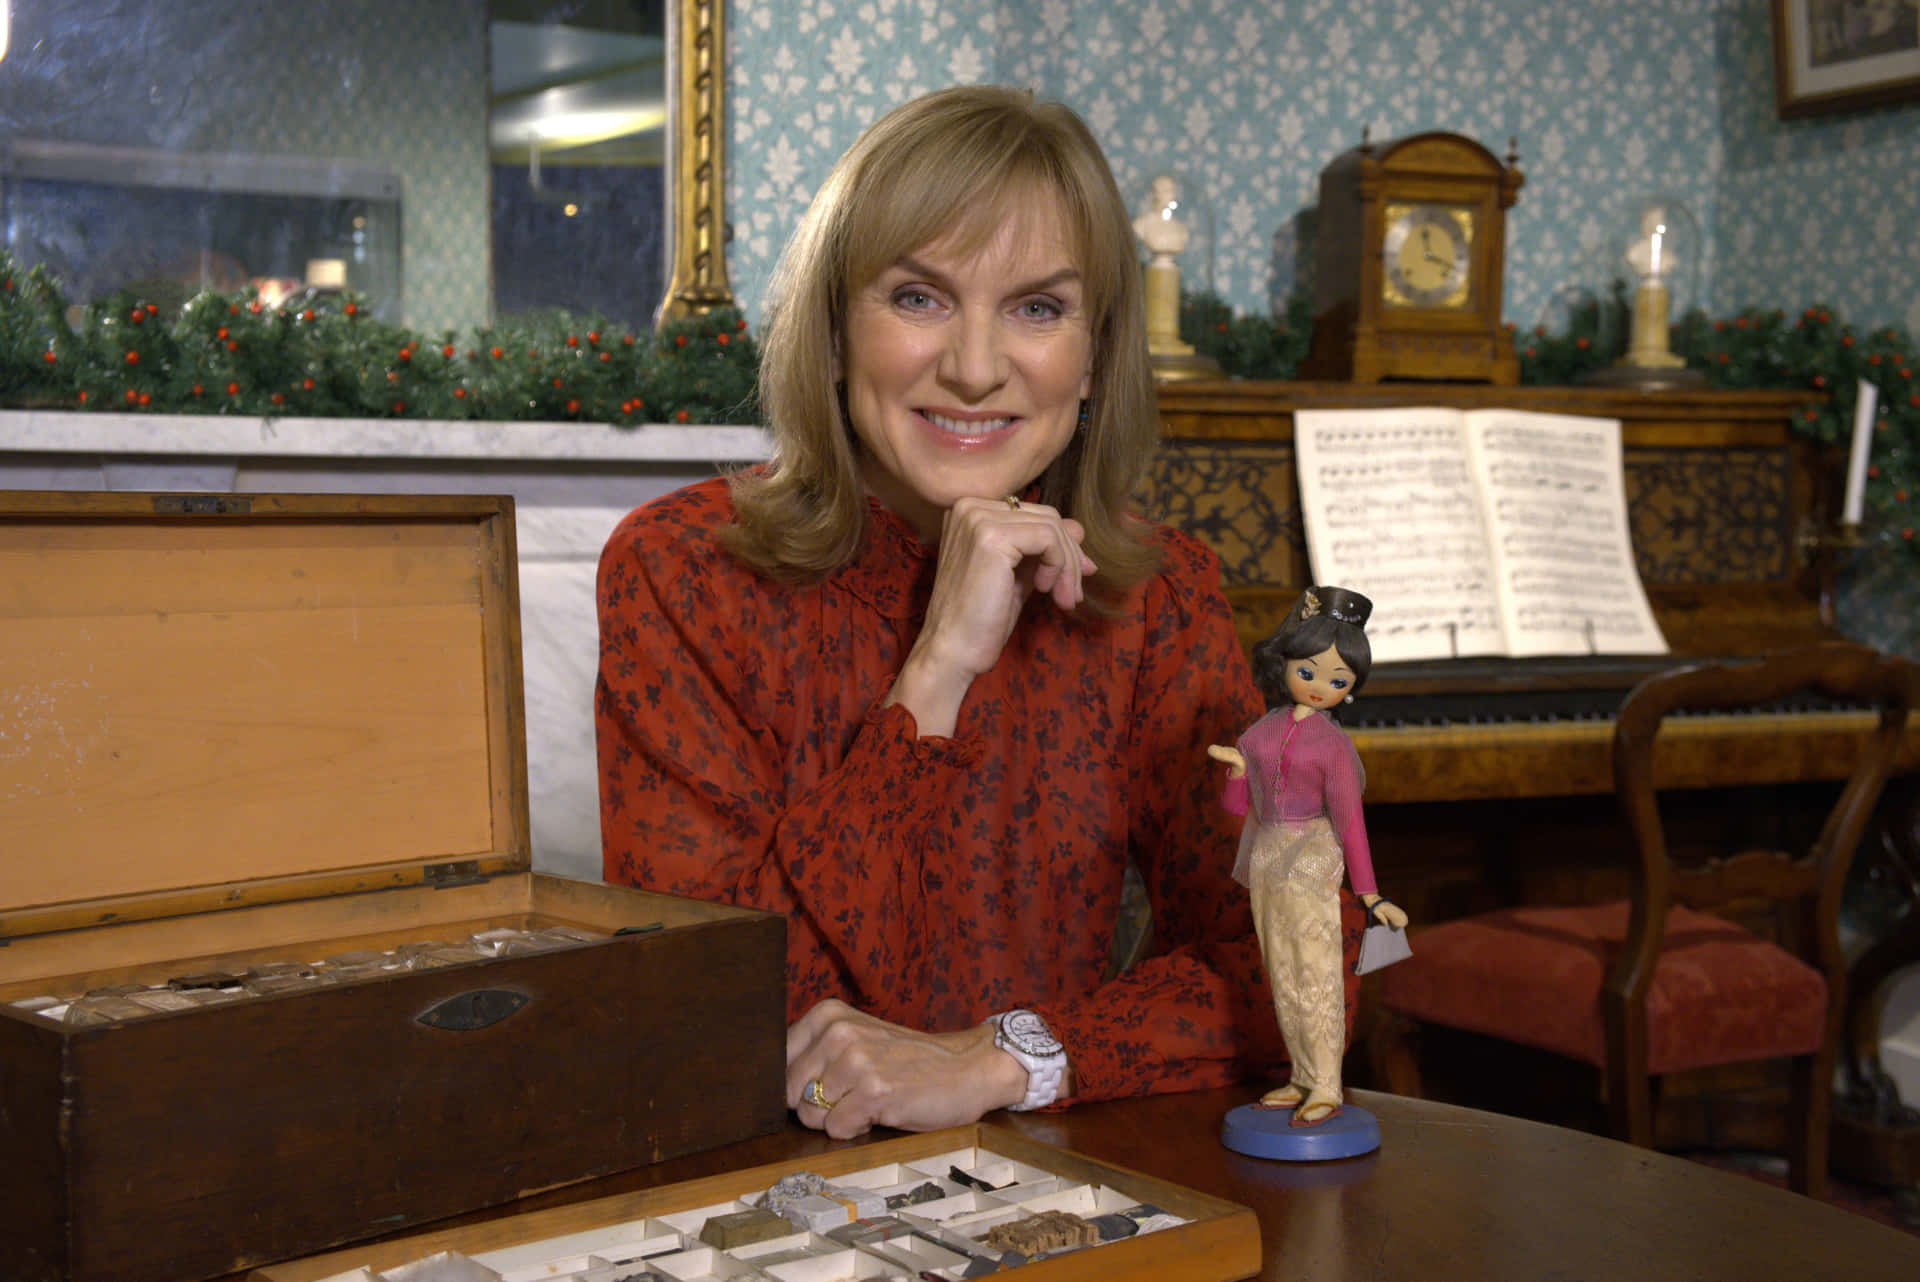 Caption: Fiona Bruce striking a pose during a photoshoot Wallpaper